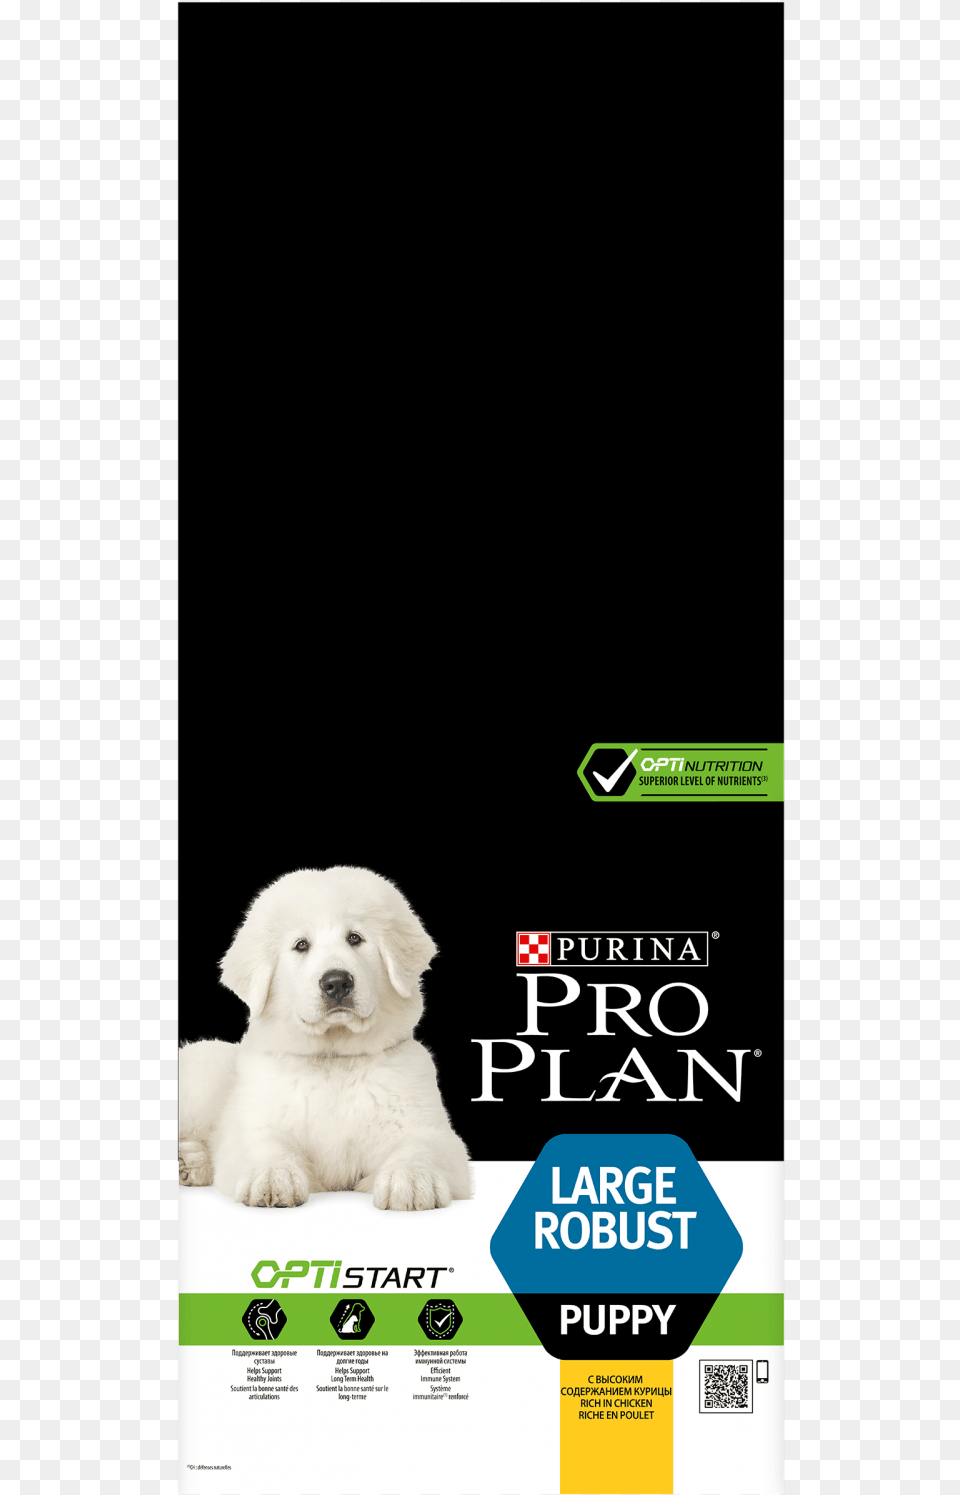 Purina Pro Plan Large Robust Puppy, Advertisement, Poster, Animal, Canine Png